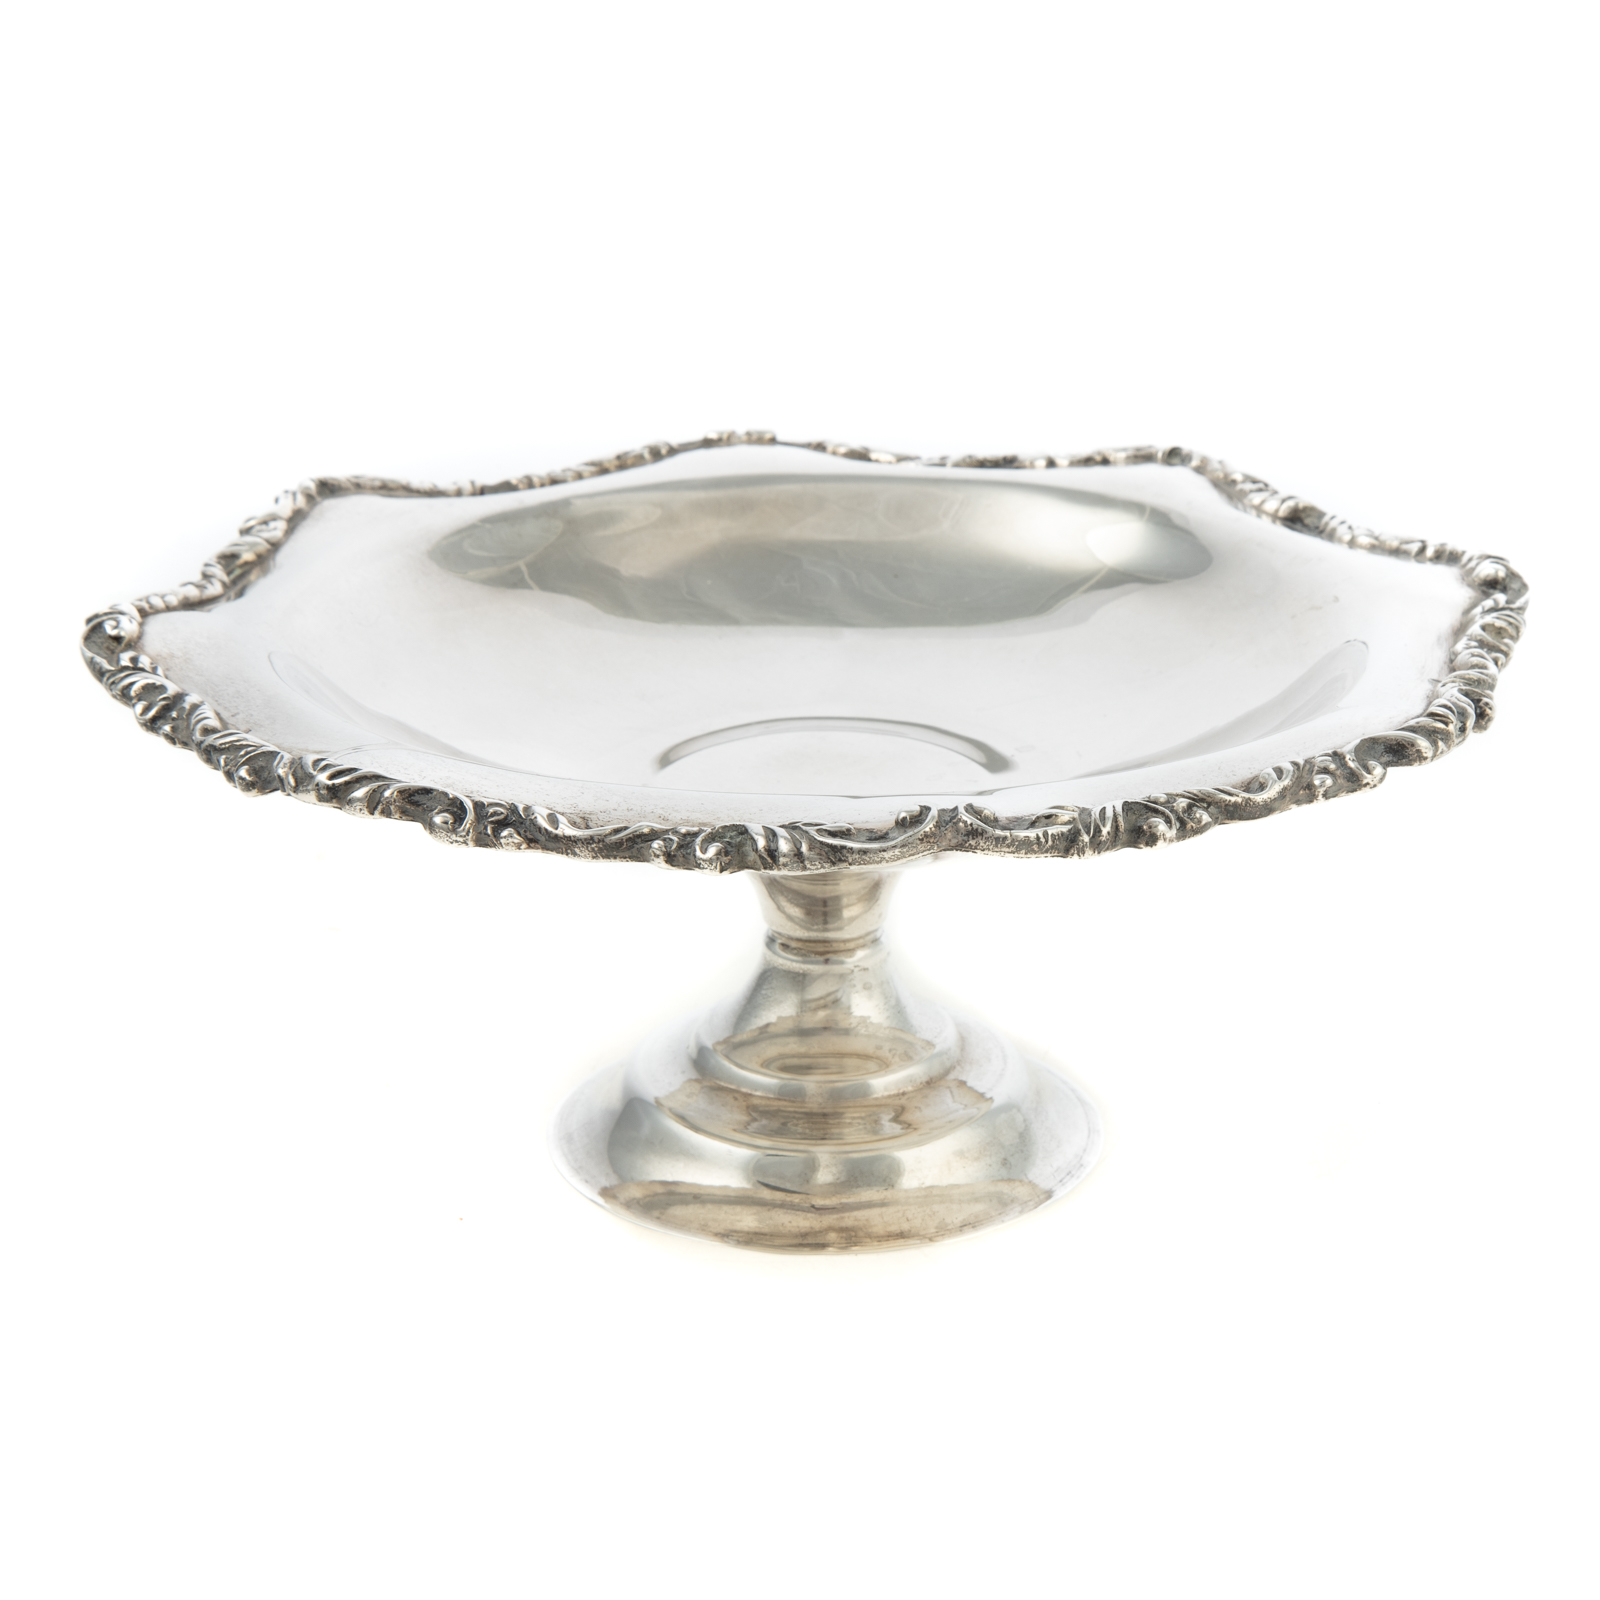 MEXICAN STERLING PEDESTAL DISH